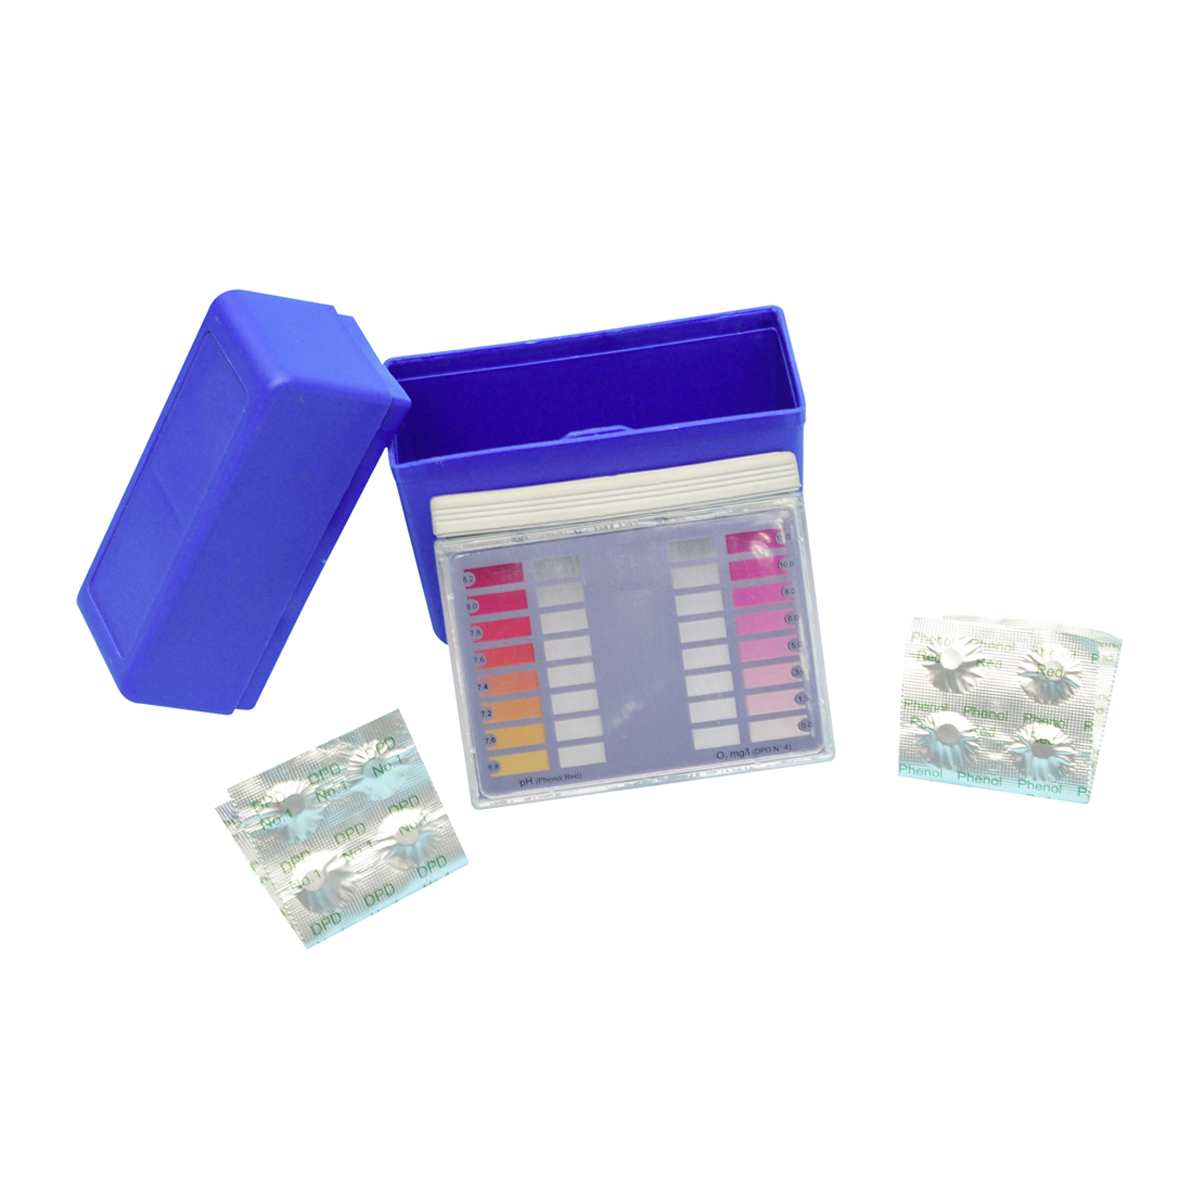 Smart test kit PH/CL DPD single packed, tablet Smart test kit PH/CL DPD single packed, tablet